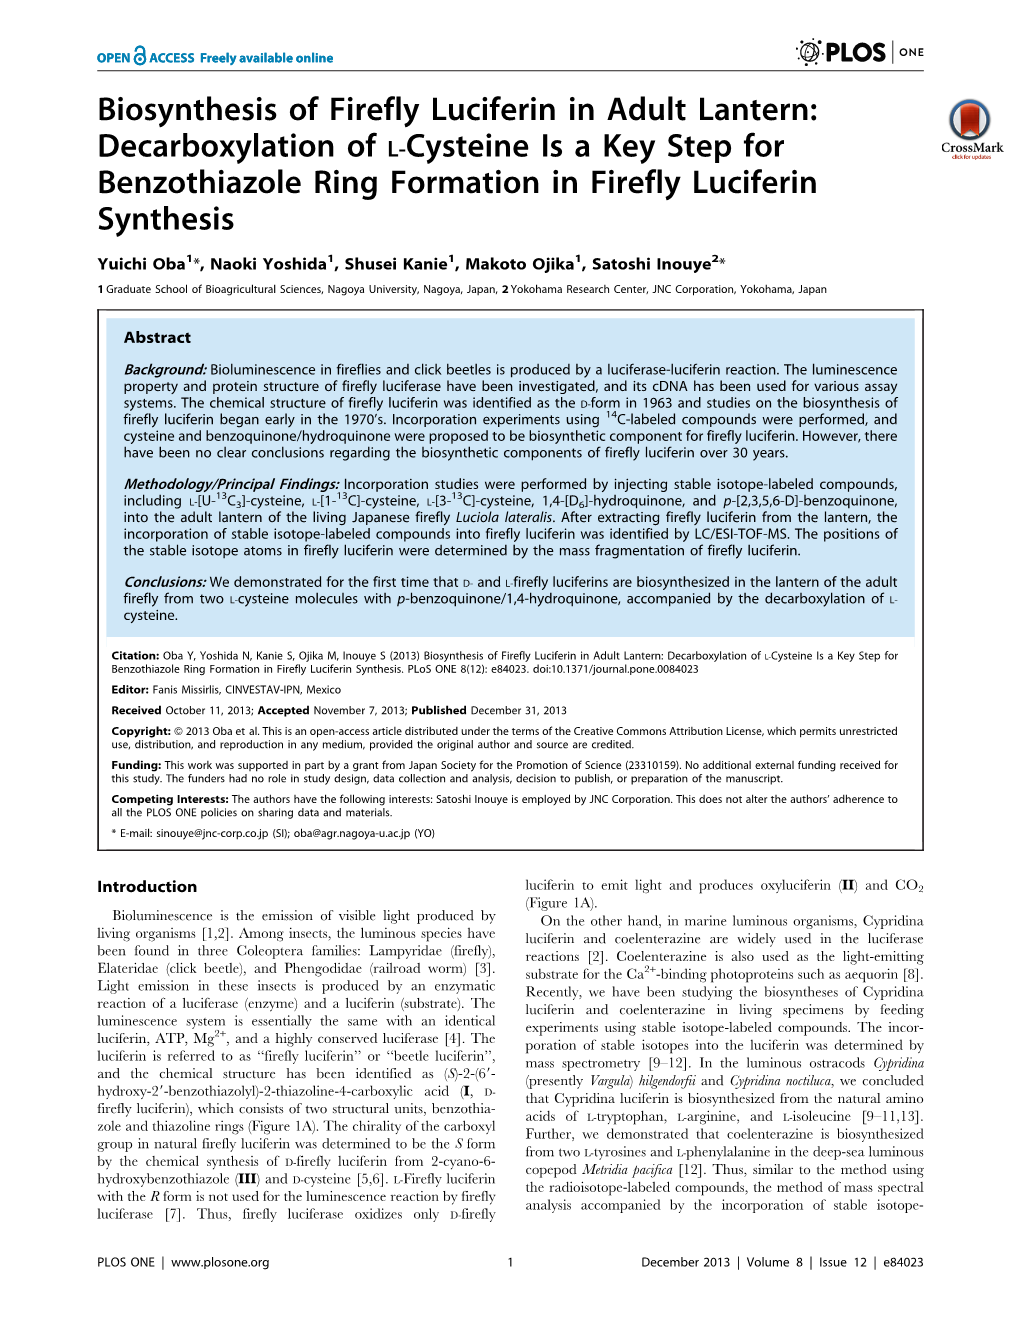 Decarboxylation of L-Cysteine Is a Key Step for Benzothiazole Ring Formation in Firefly Luciferin Synthesis